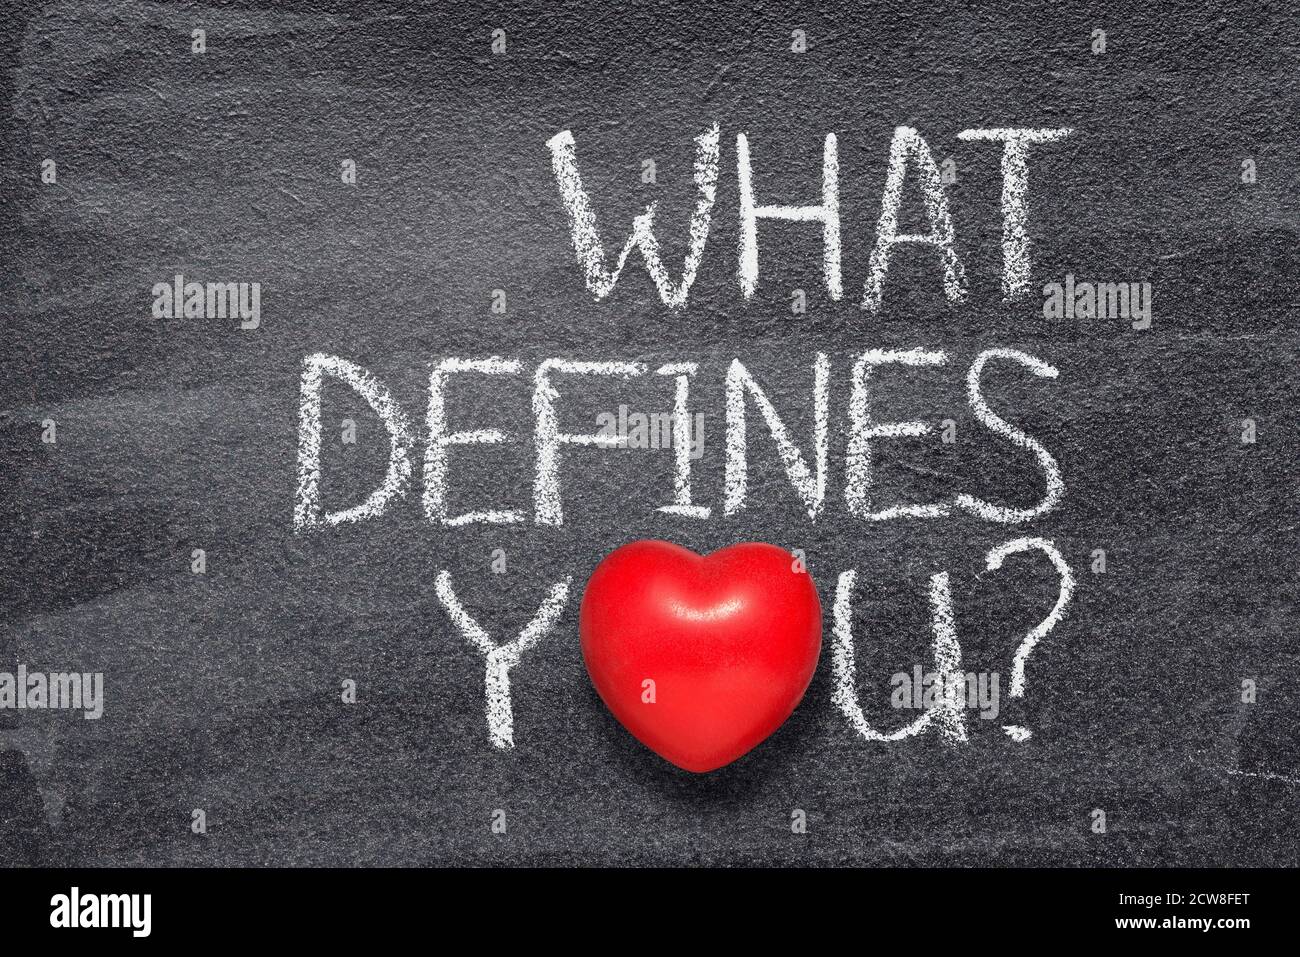 what defines you question written on chalkboard with red heart symbol Stock Photo